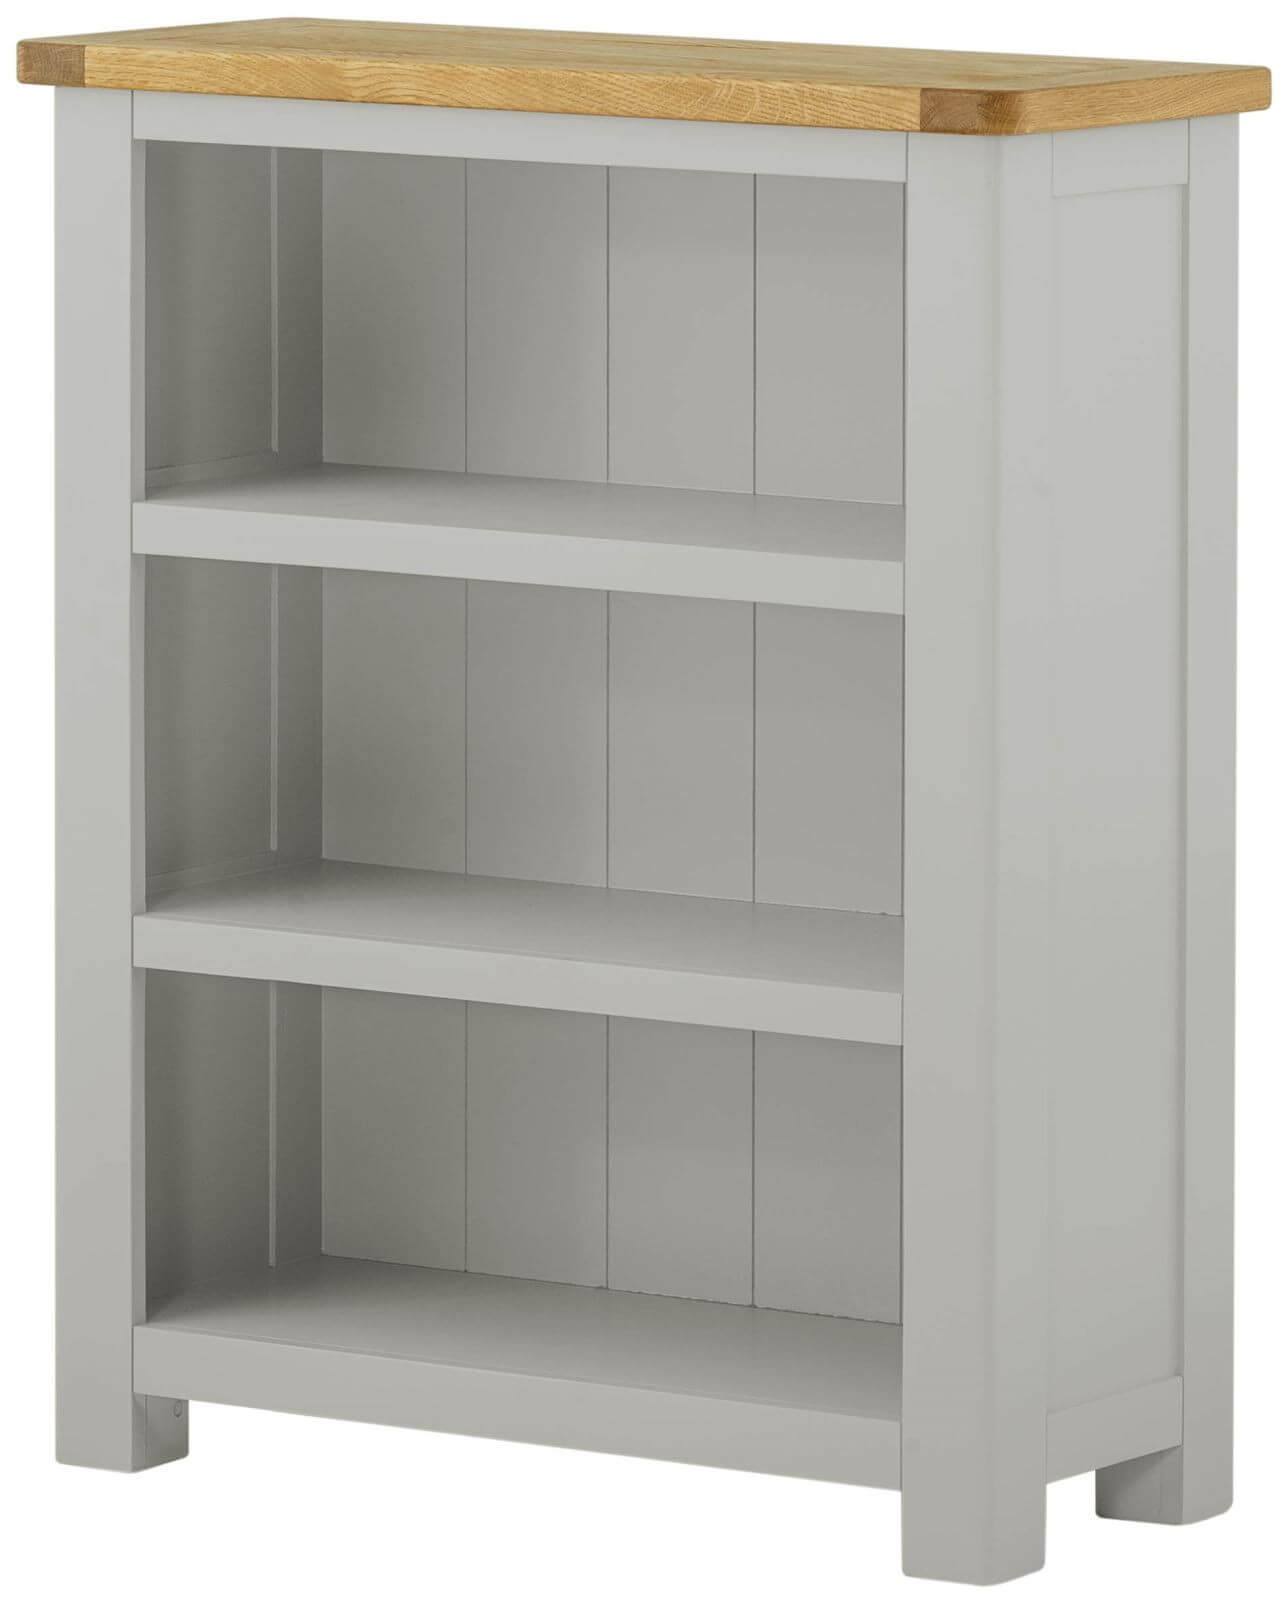 Showing image for Small seattle bookcase - stone